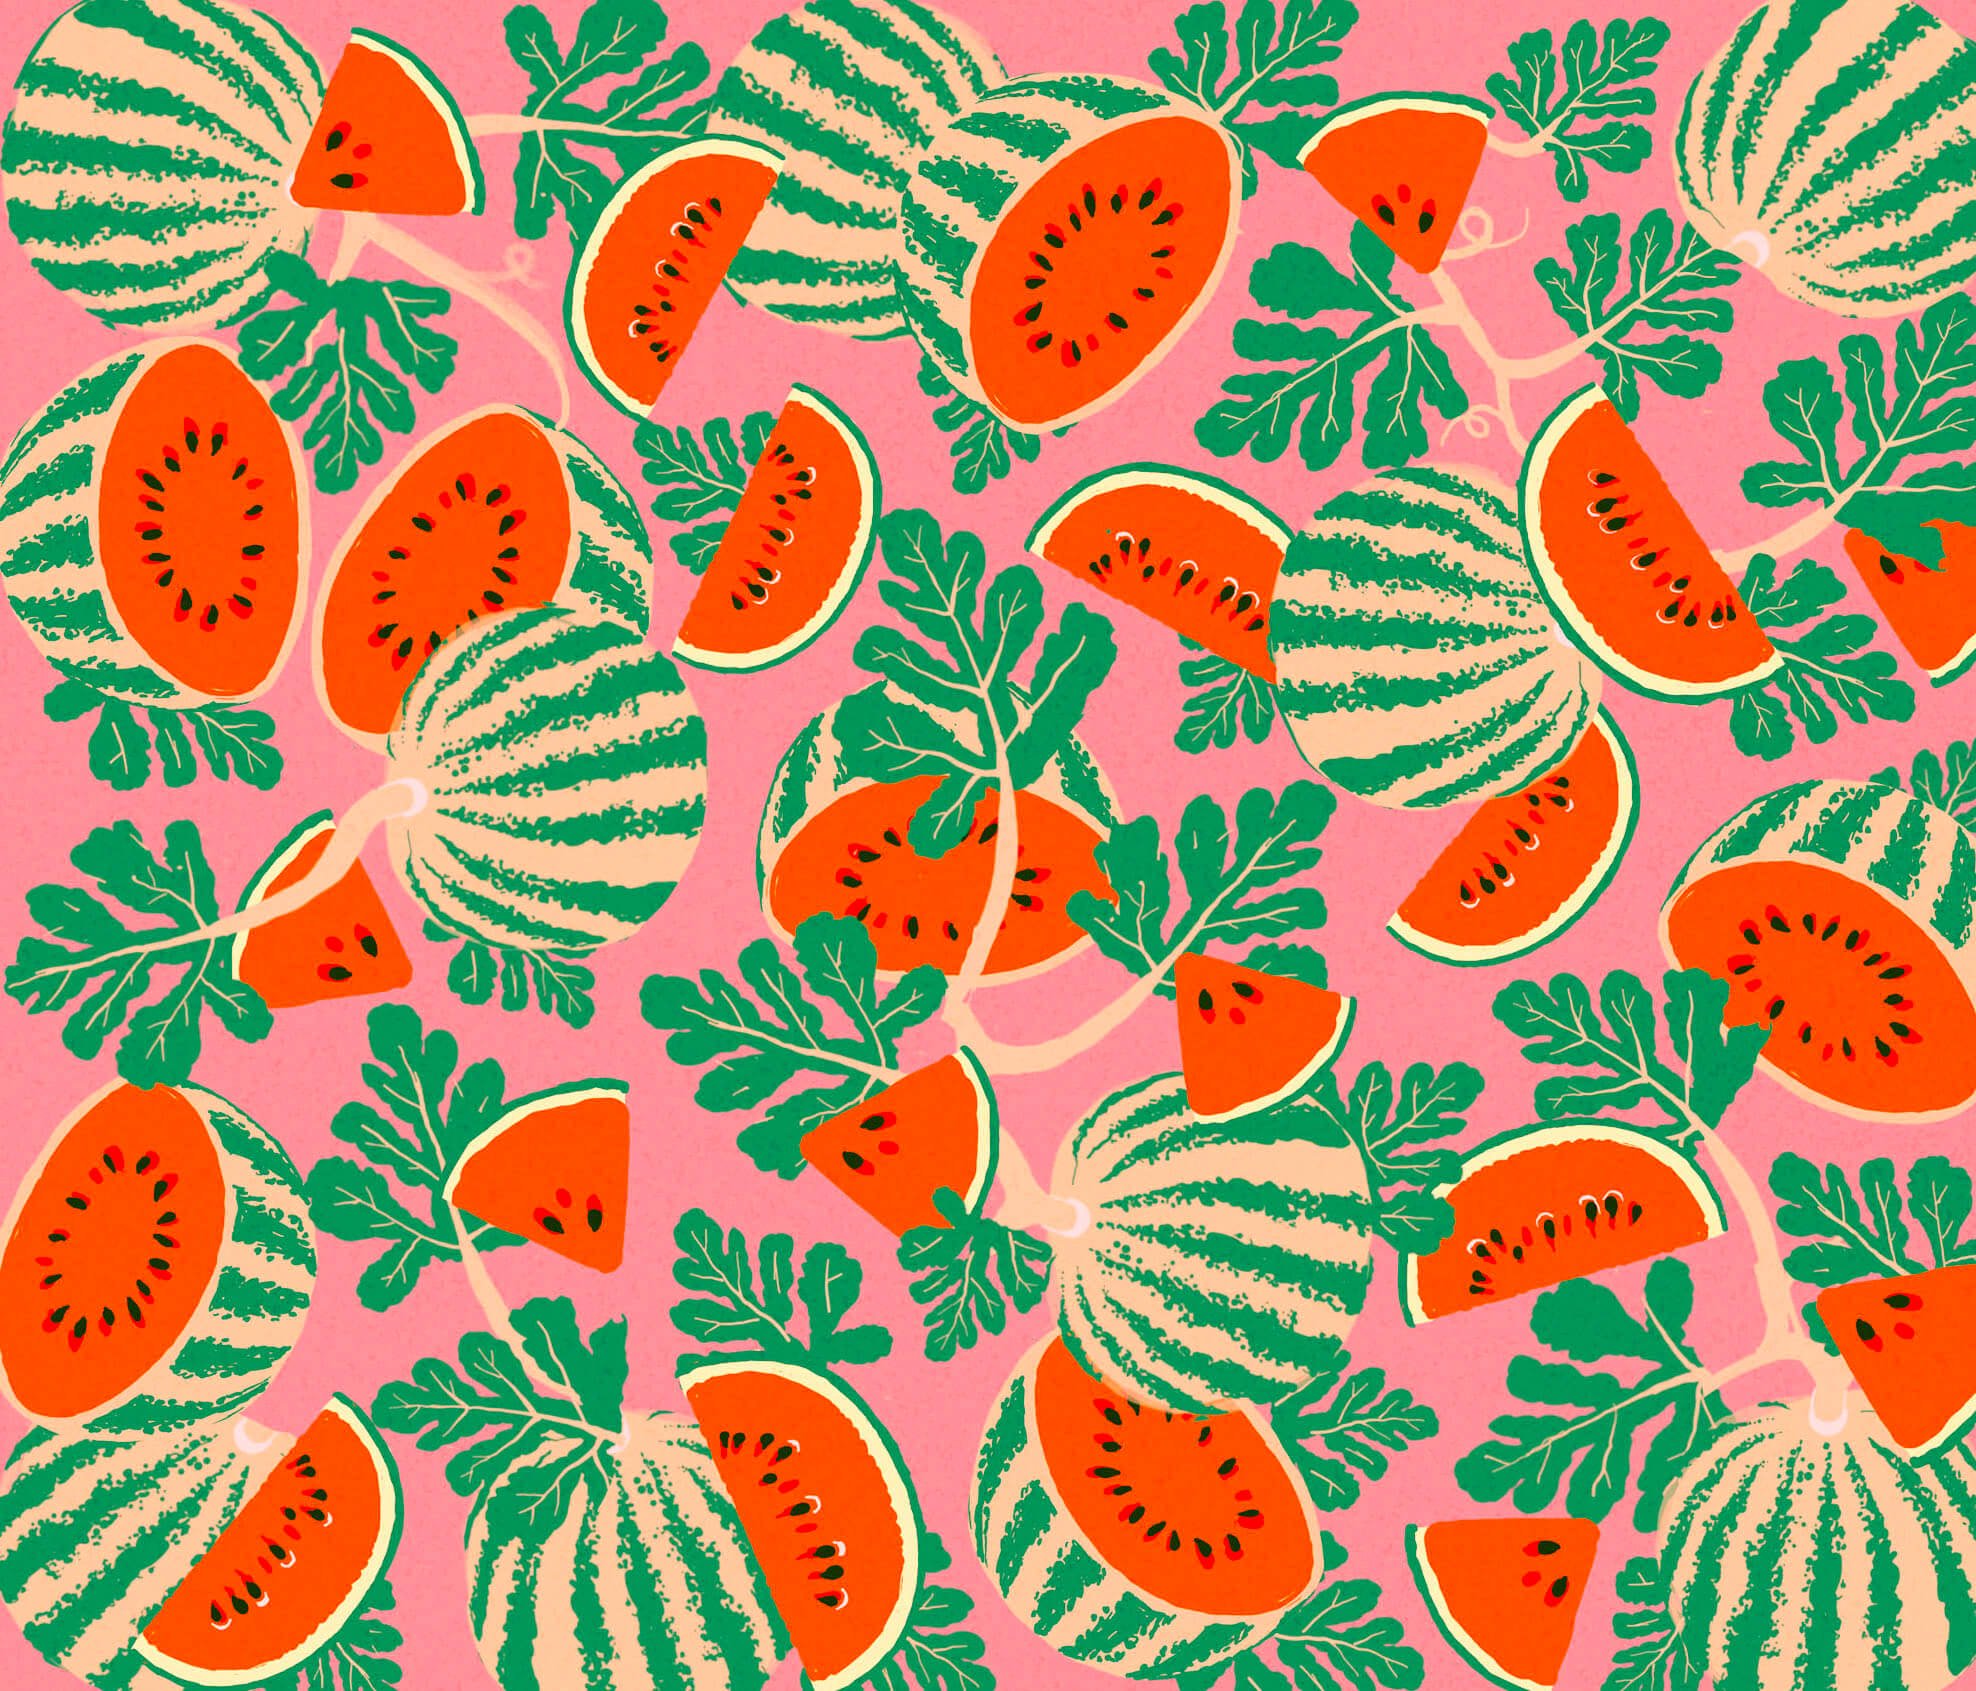  Colourful illustration of watermelons designed to form a pattern. The pattern has a printed texture and in pink, orange and green bold colours.  